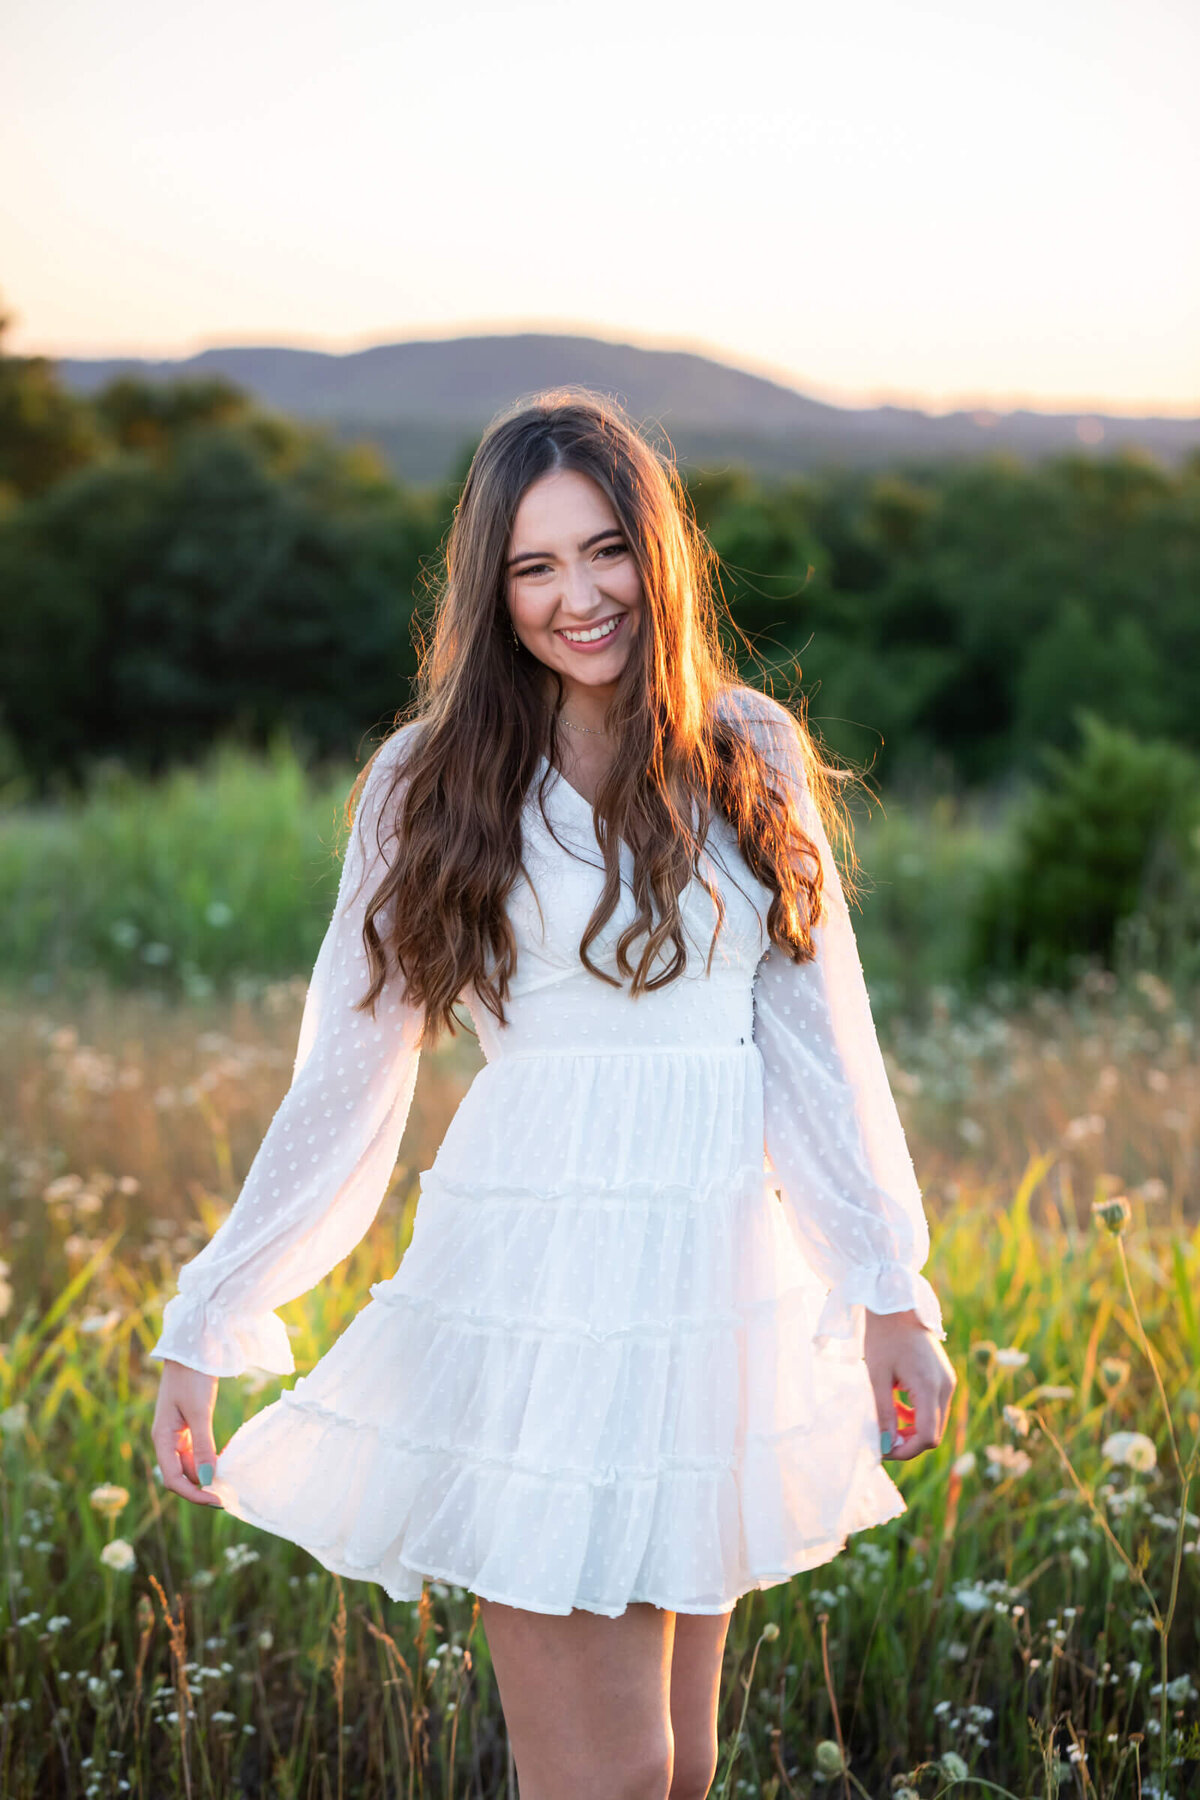 A lovely teen girl wearing a boho style white dress twirls and laughs in a wildflower field. Photograph by Dynae Levingston.